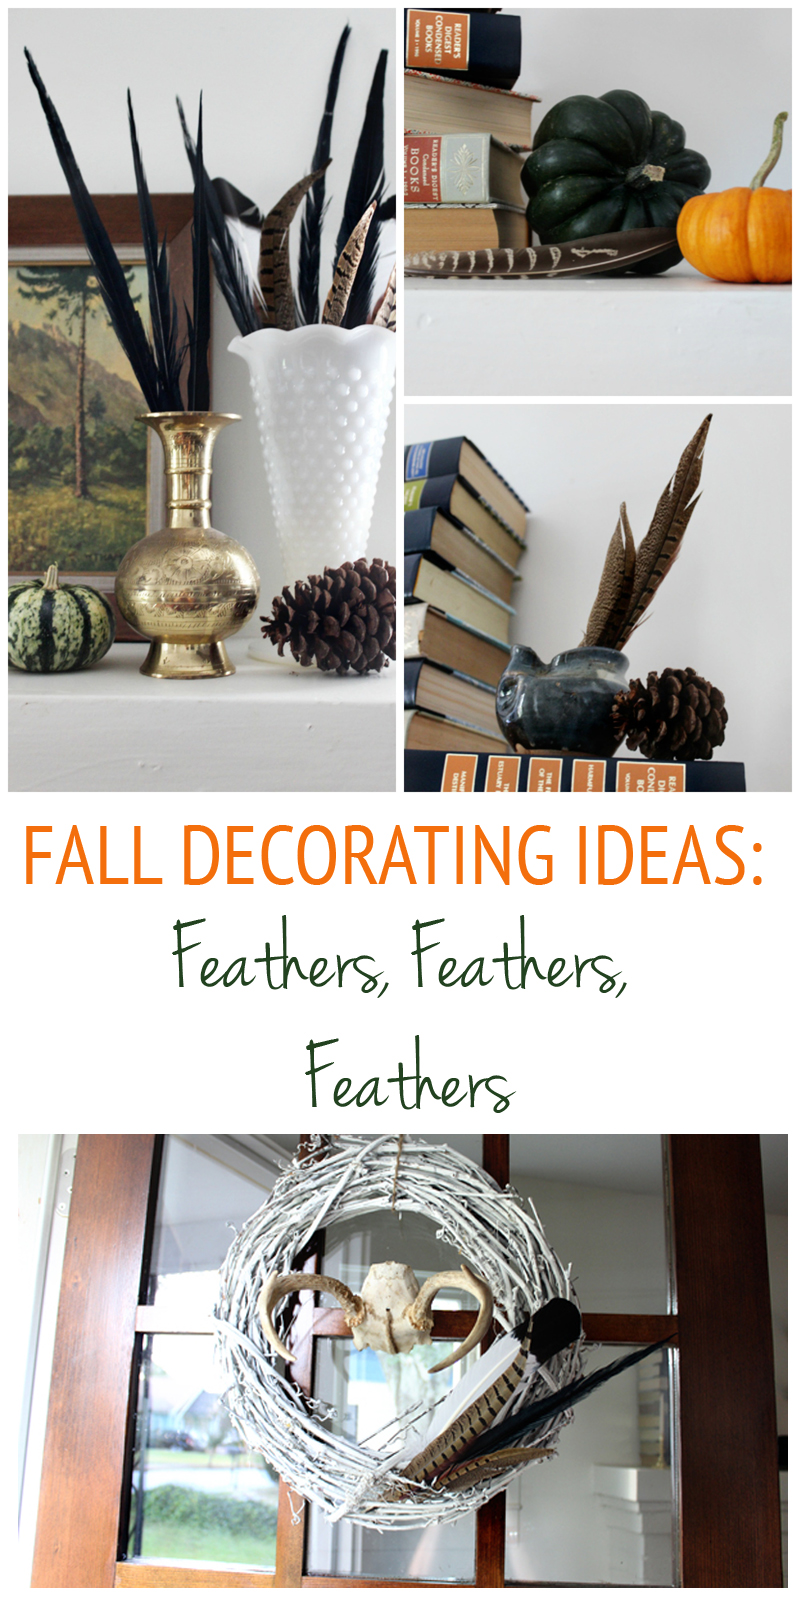 Fall Decorating with Feathers